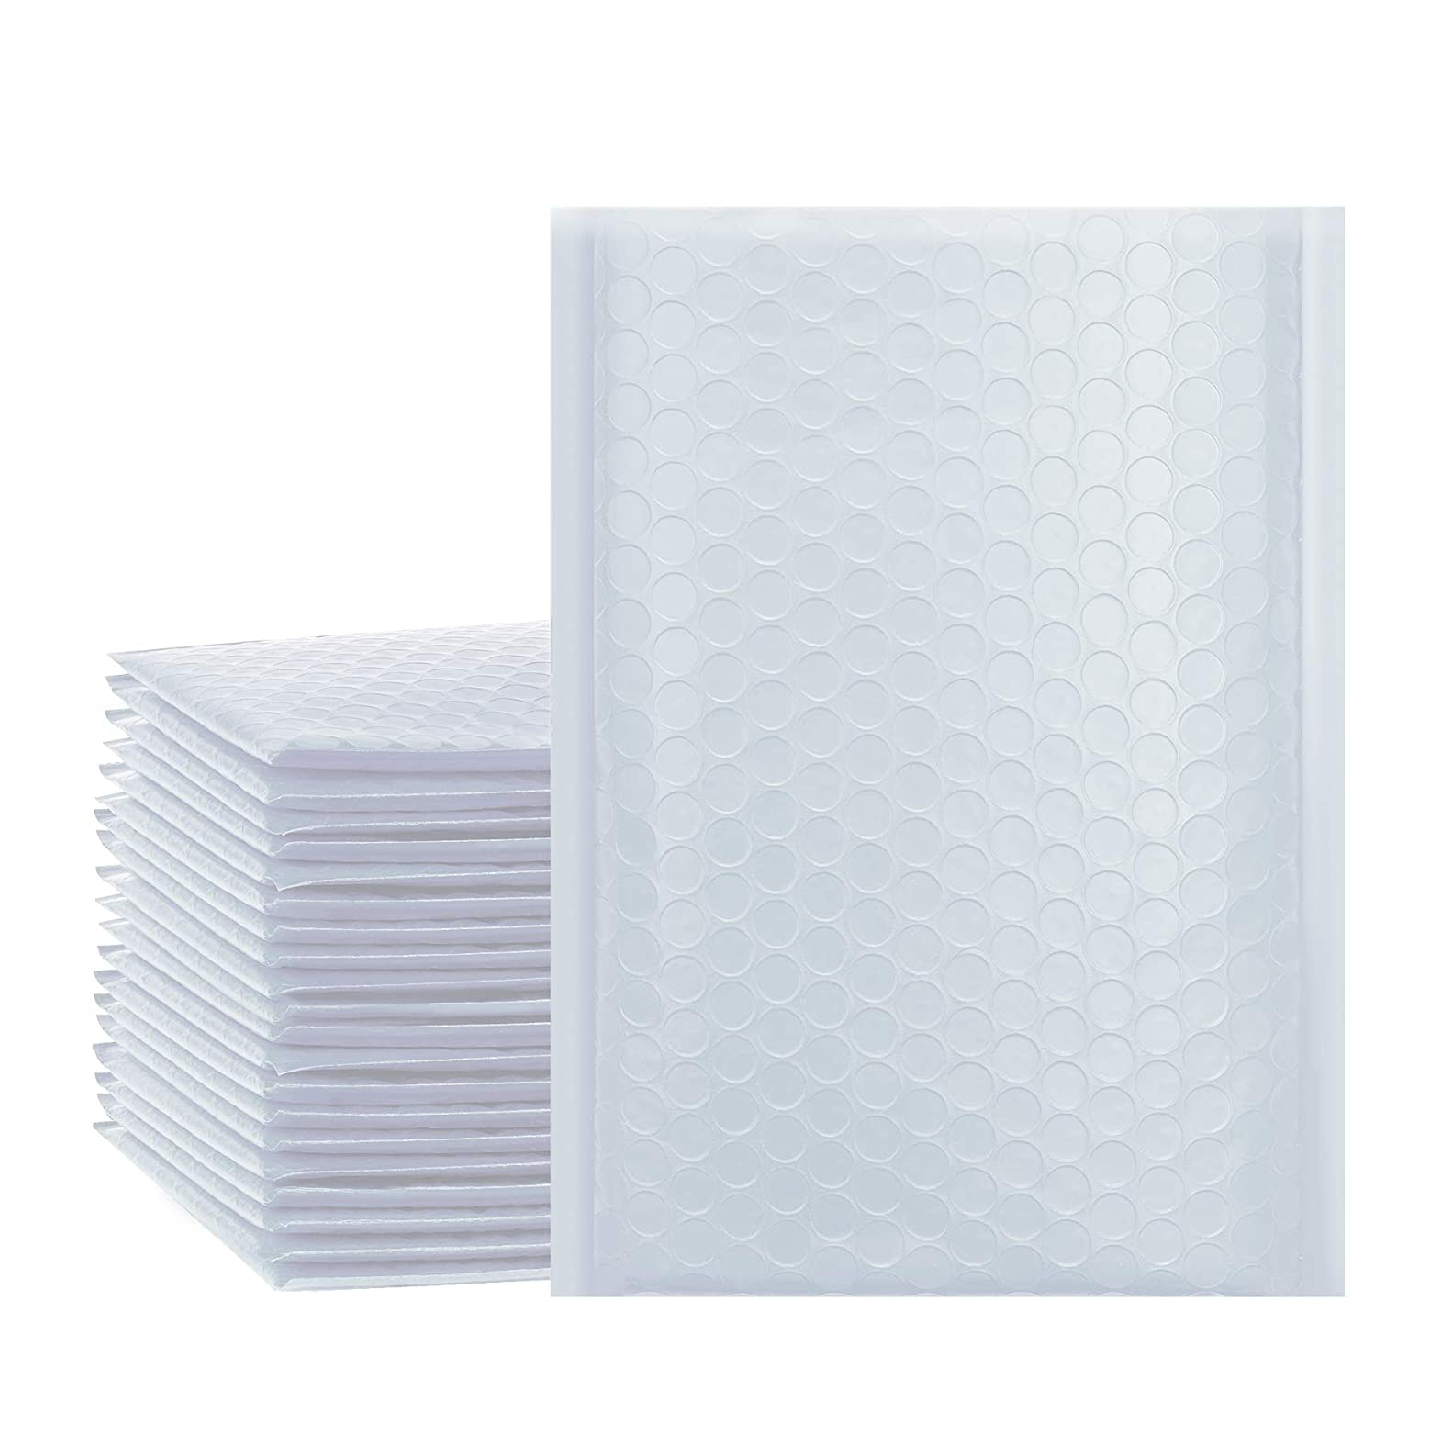 6×10 Bubble Mailers (White)